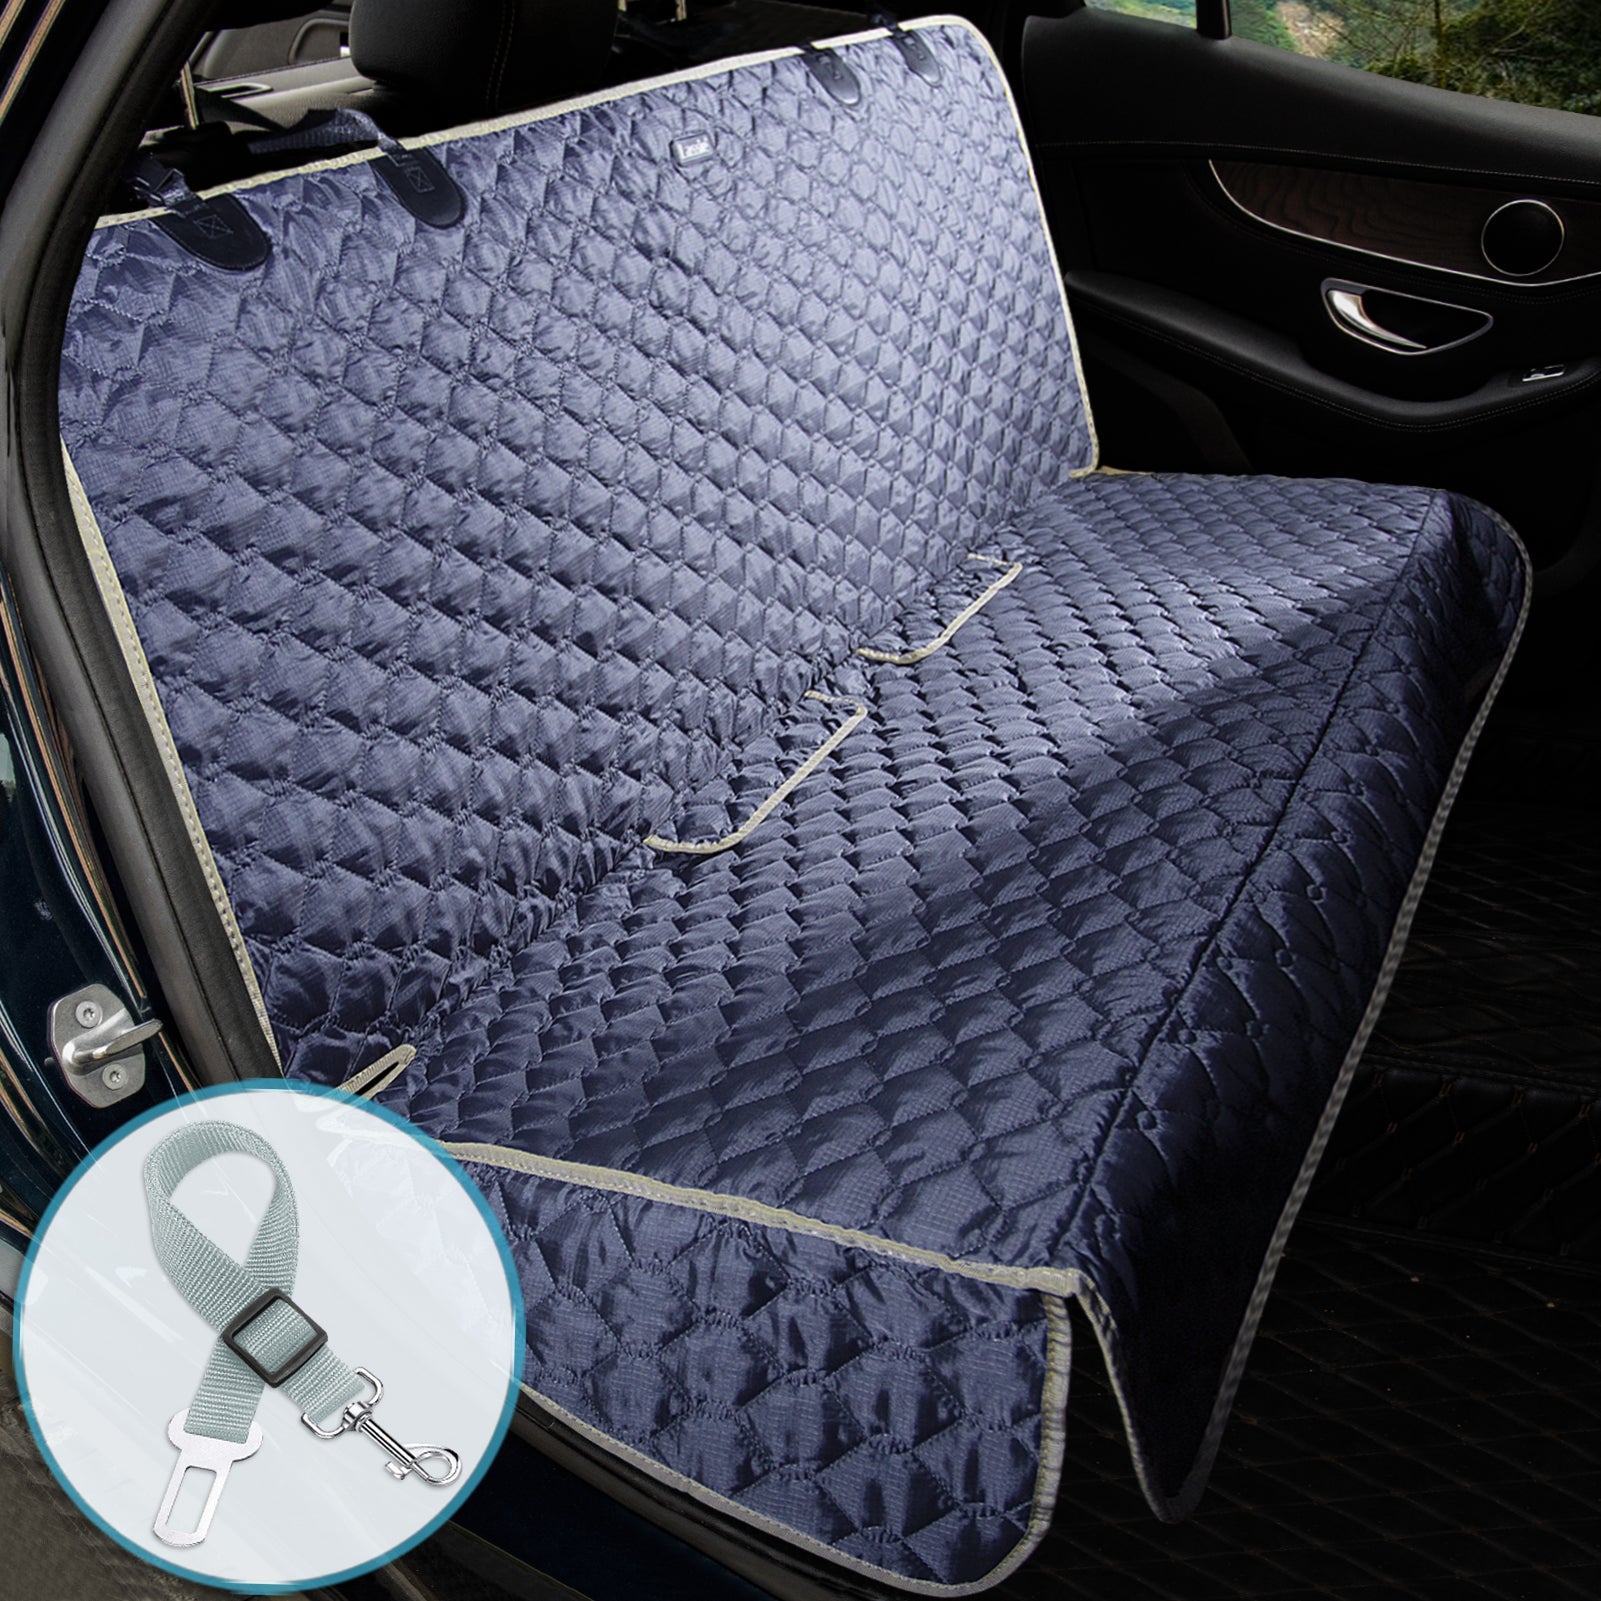 Dog Car Seat Cover, Waterproof Nonslip Pet Seat Cover for Back Seat, Mesh Visual Window, Heavy Duty